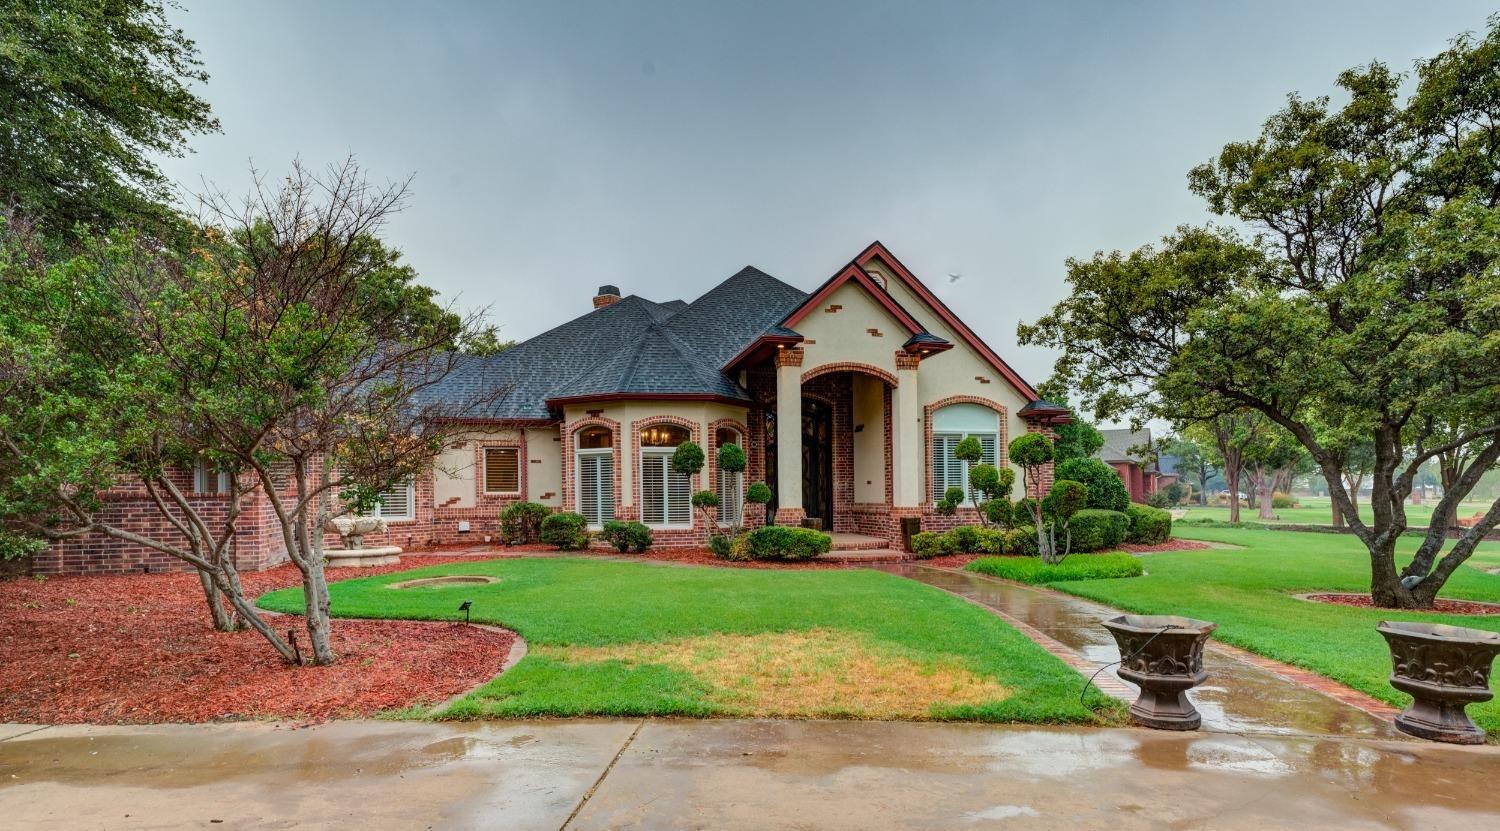 A rare find in Llano Estates. LOW TAXES just outside of the city limits. 4 bedrooms, 3 bathrooms, 2 dining areas, sunroom, basement theater, and 5 garage spaces. This home is truly one of a kind and you won't find another like it. You have to see it in person to appreciate it!